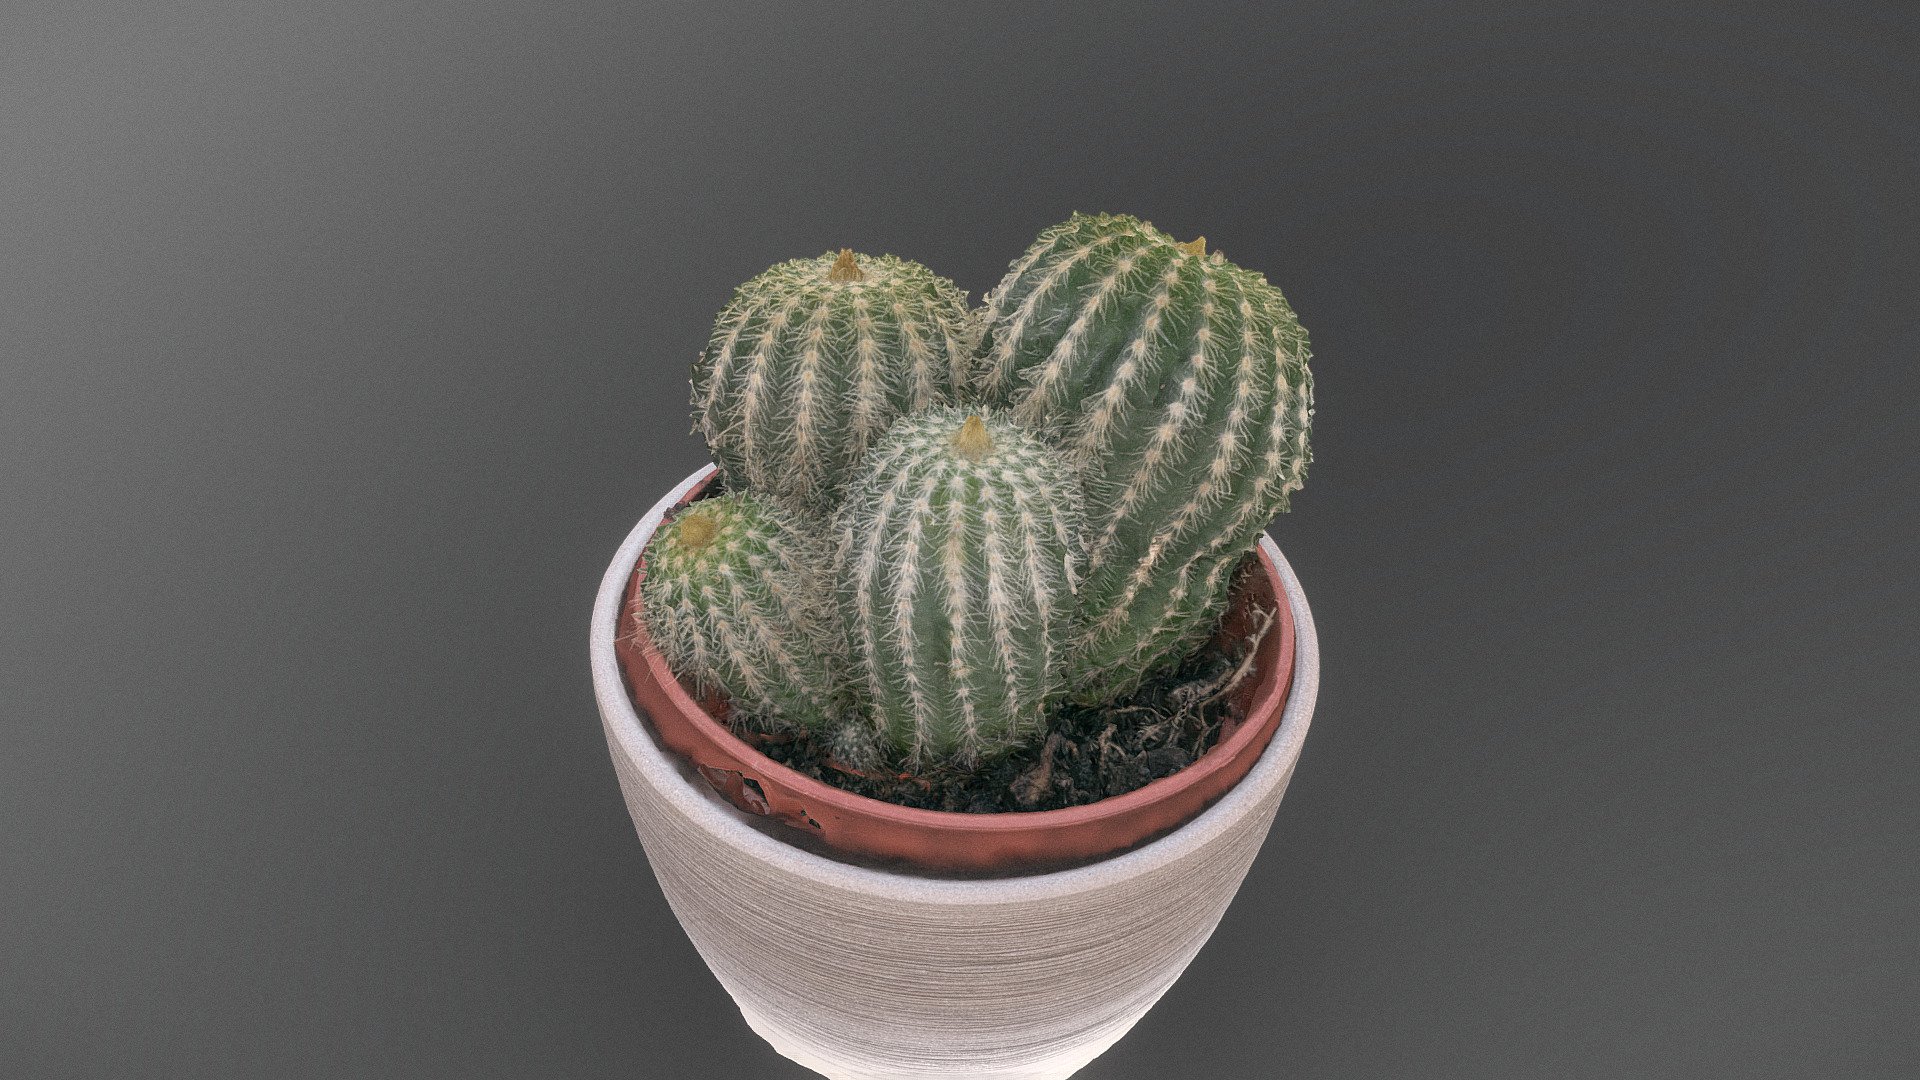 Lace hedgehog (Echinocereus reichenbachii) Cactus cacti group with small spines sucullent plant,  in terracotta glazed flower pot planter

photogrammetry scan (120x36mp), 3x8k texture + HD normals - Grouped cactus - Buy Royalty Free 3D model by matousekfoto 3d model